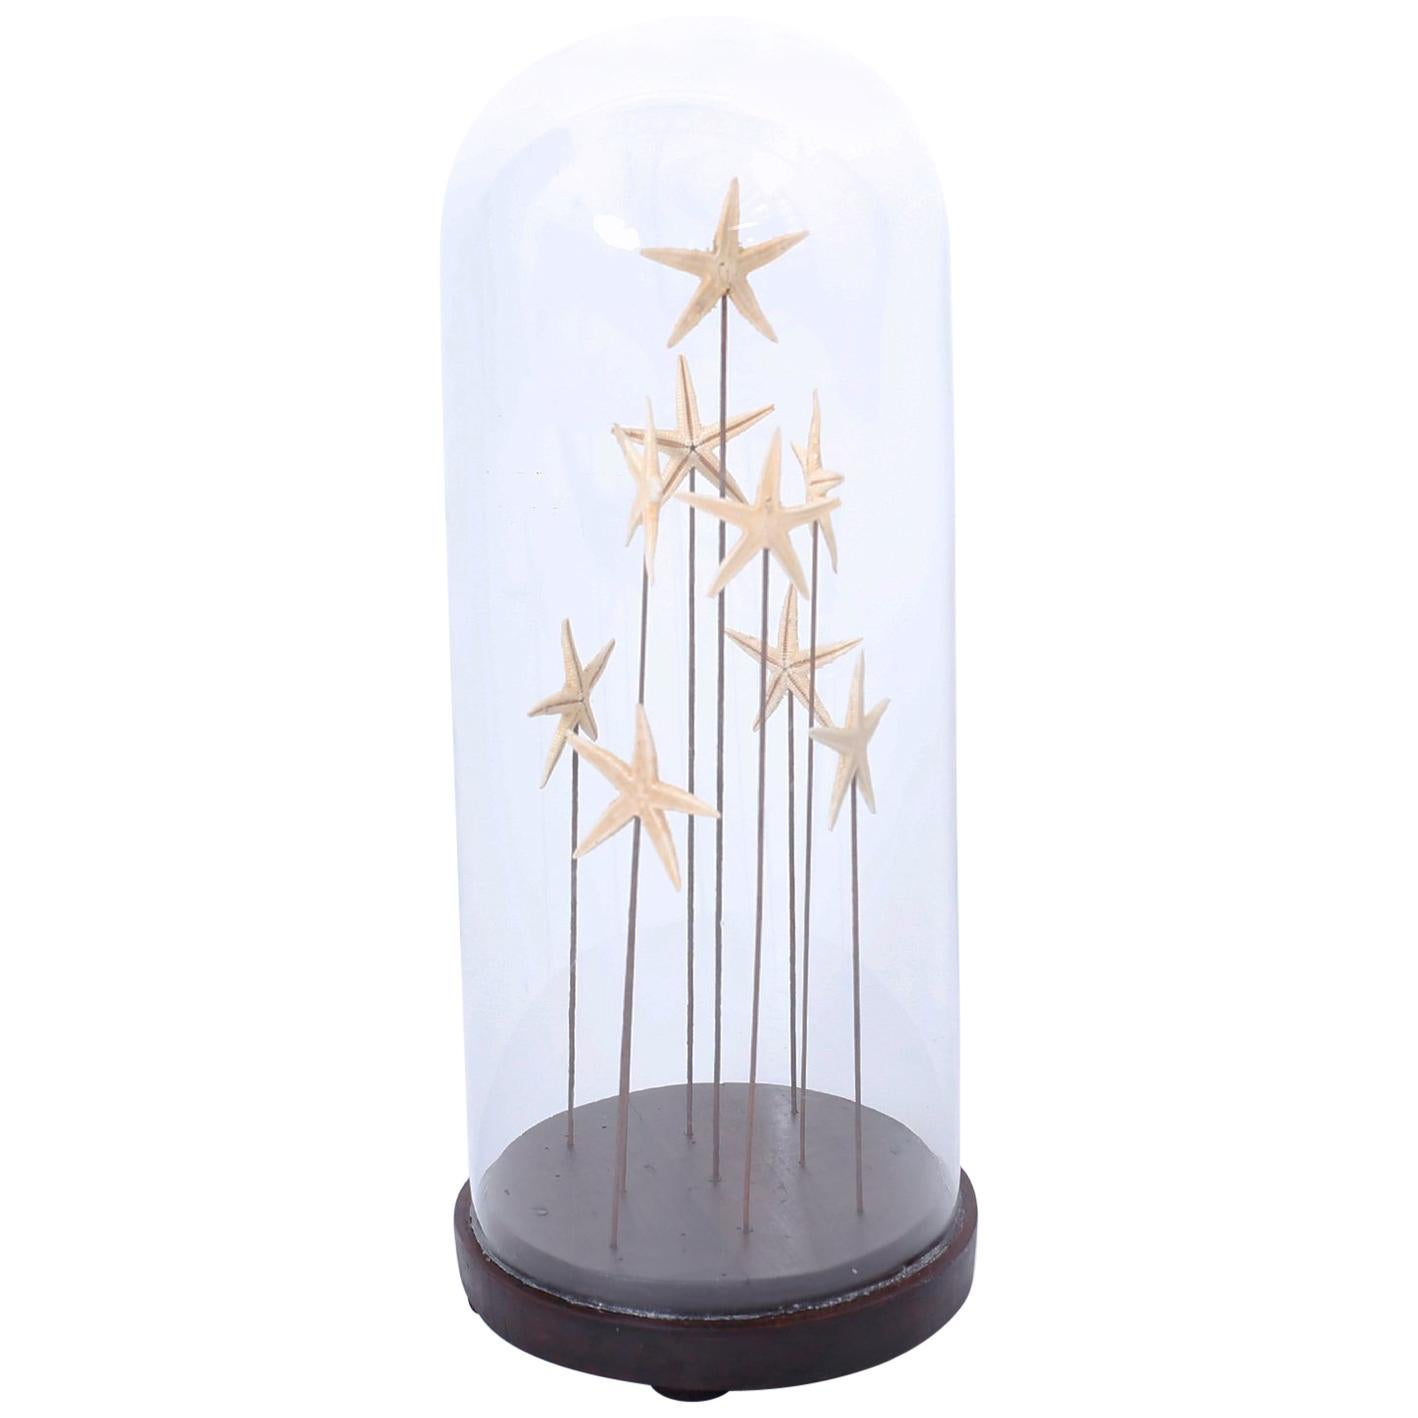 Starfish in a Vintage Glass Specimen Dome